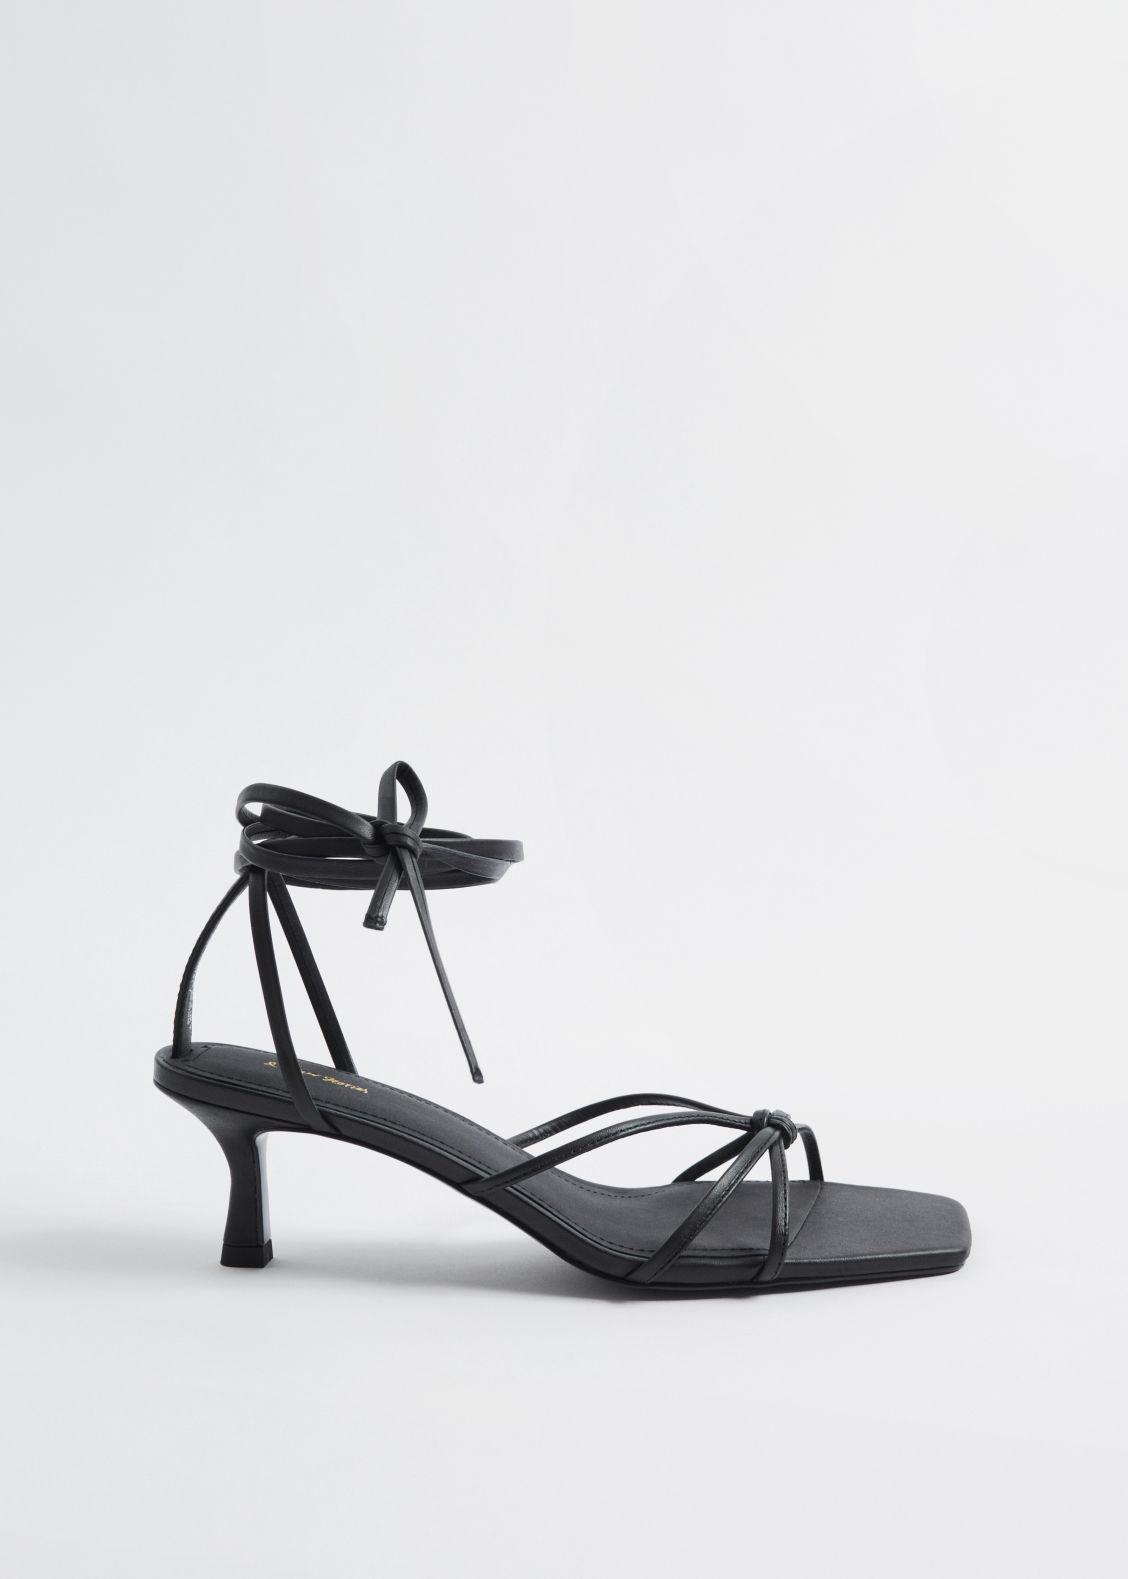 & Other Stories Strappy Kitten Heel Leather Sandals in Black | Lyst